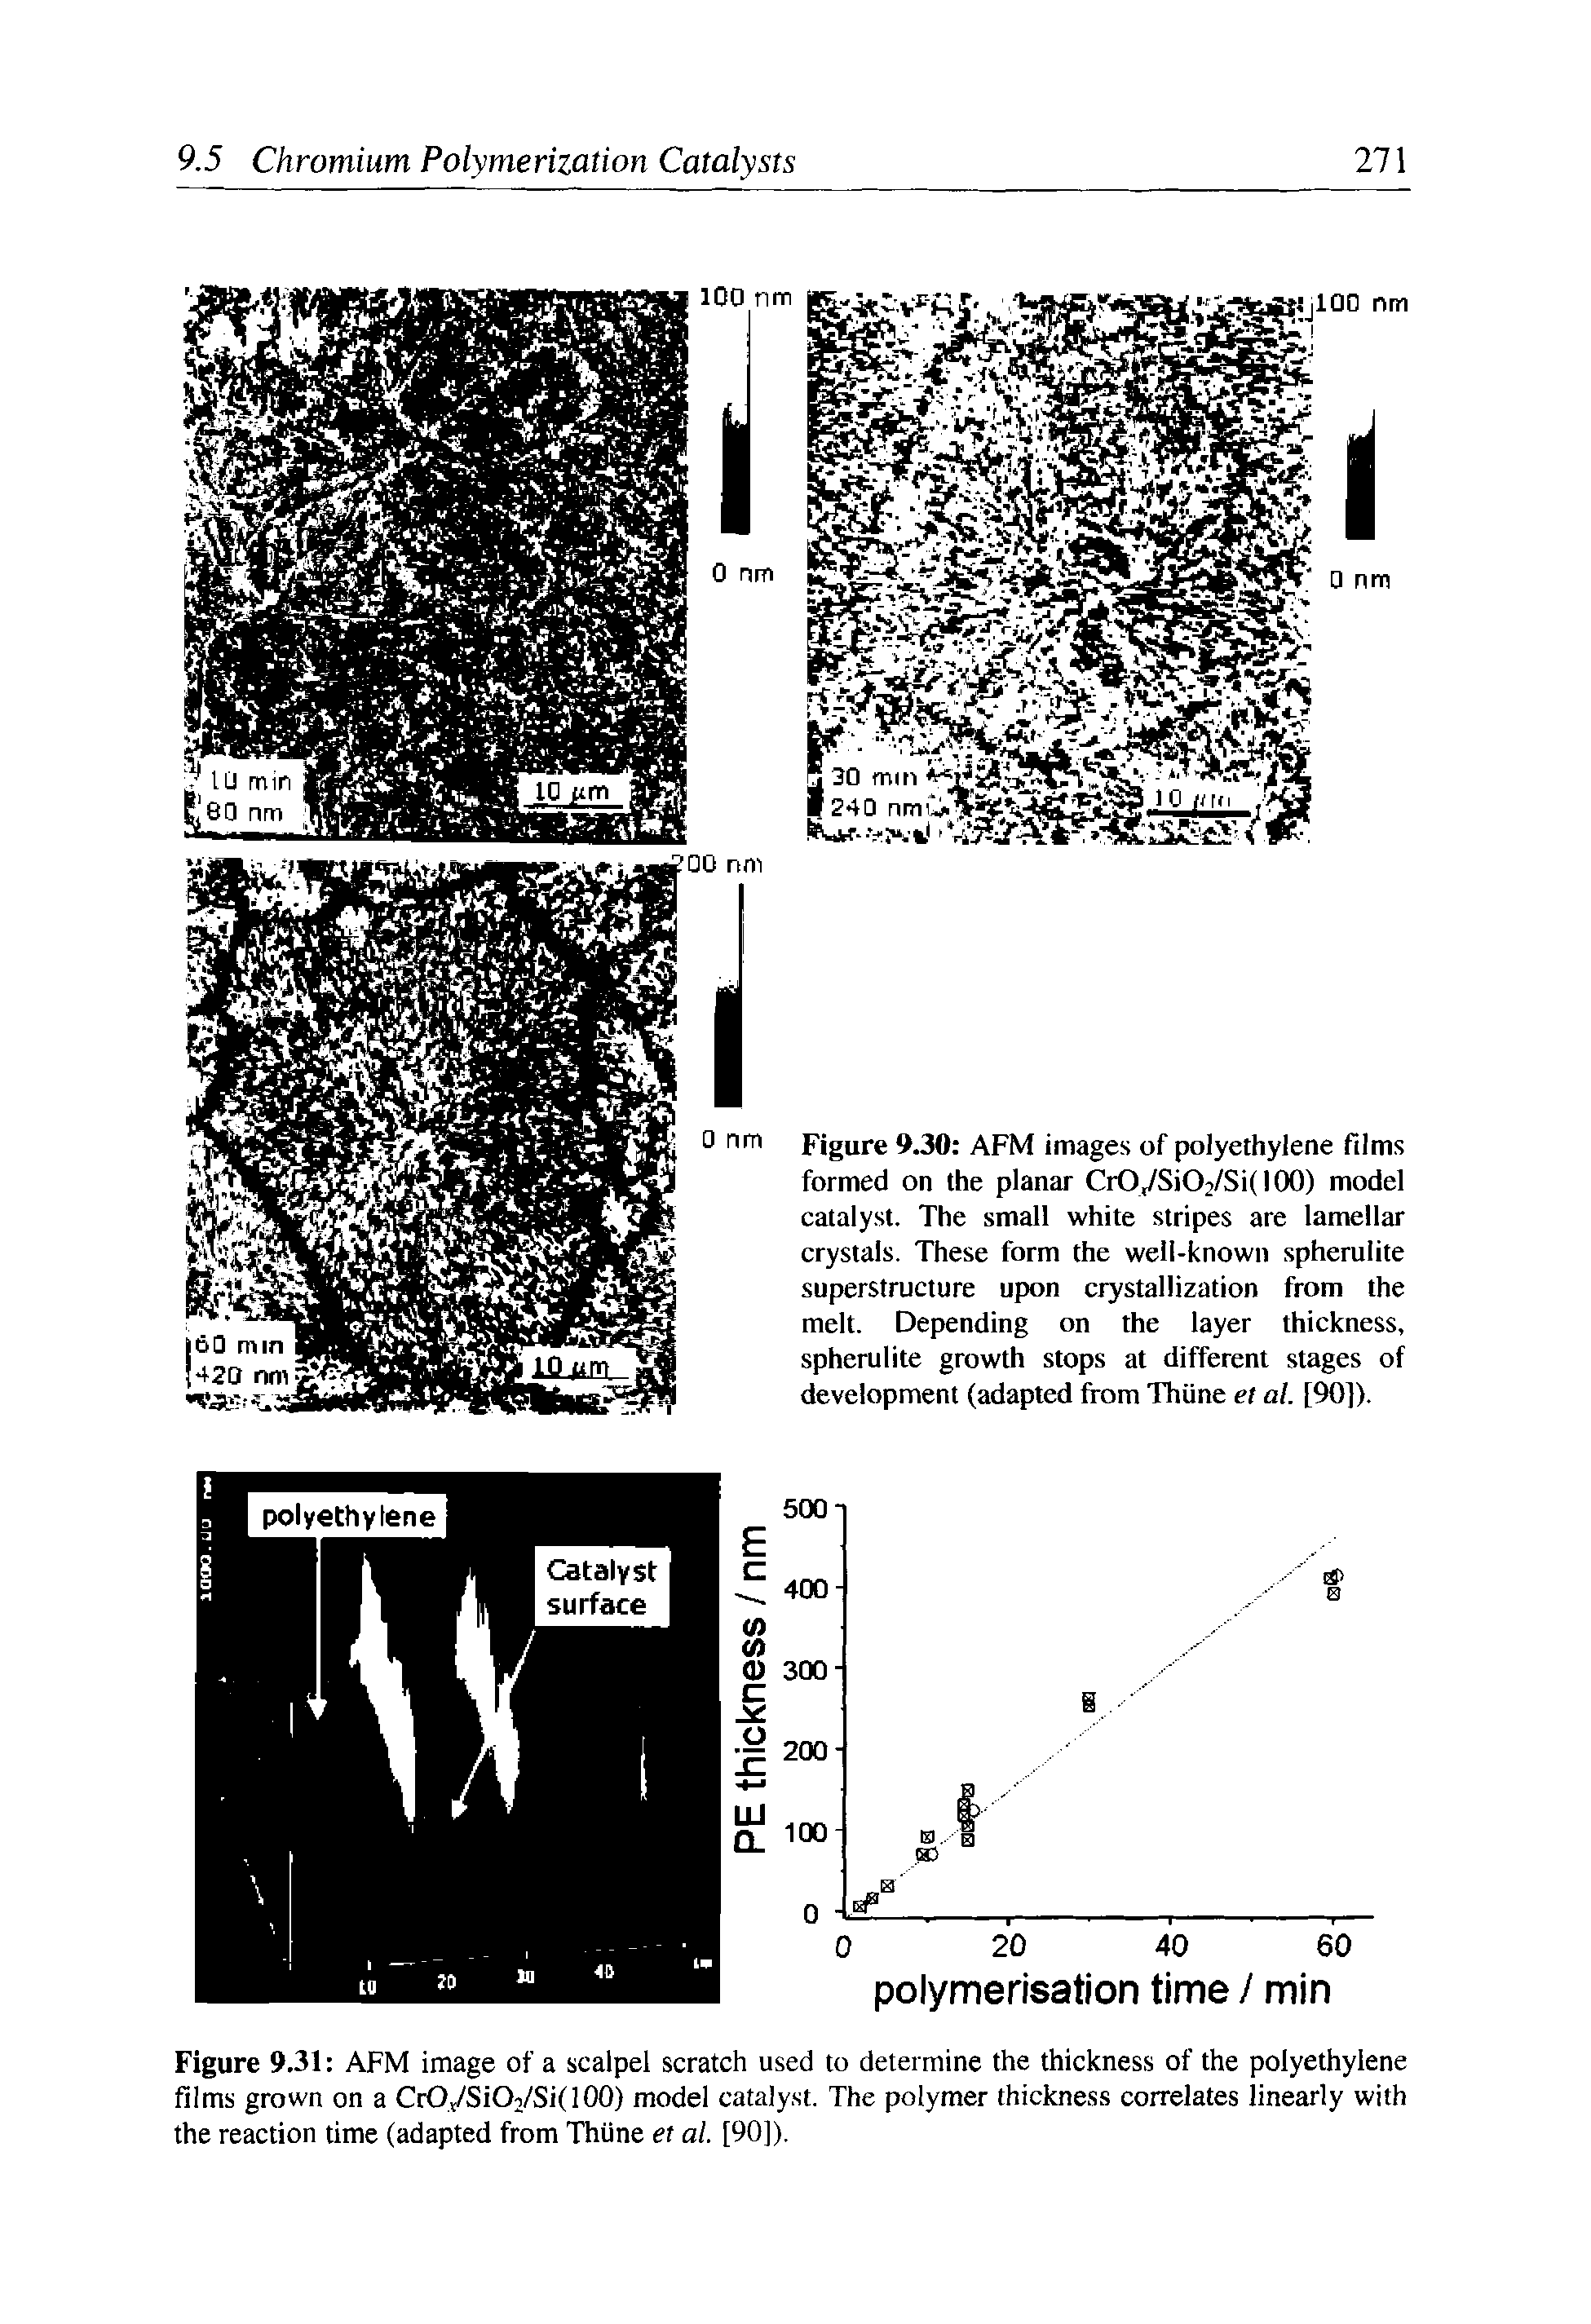 Figure 9.31 AFM image of a scalpel scratch used to determine the thickness of the polyethylene films grown on a Cr0v/Si02/Si(100) model catalyst. The polymer thickness correlates linearly with the reaction time (adapted from Thiine et at. [90]).